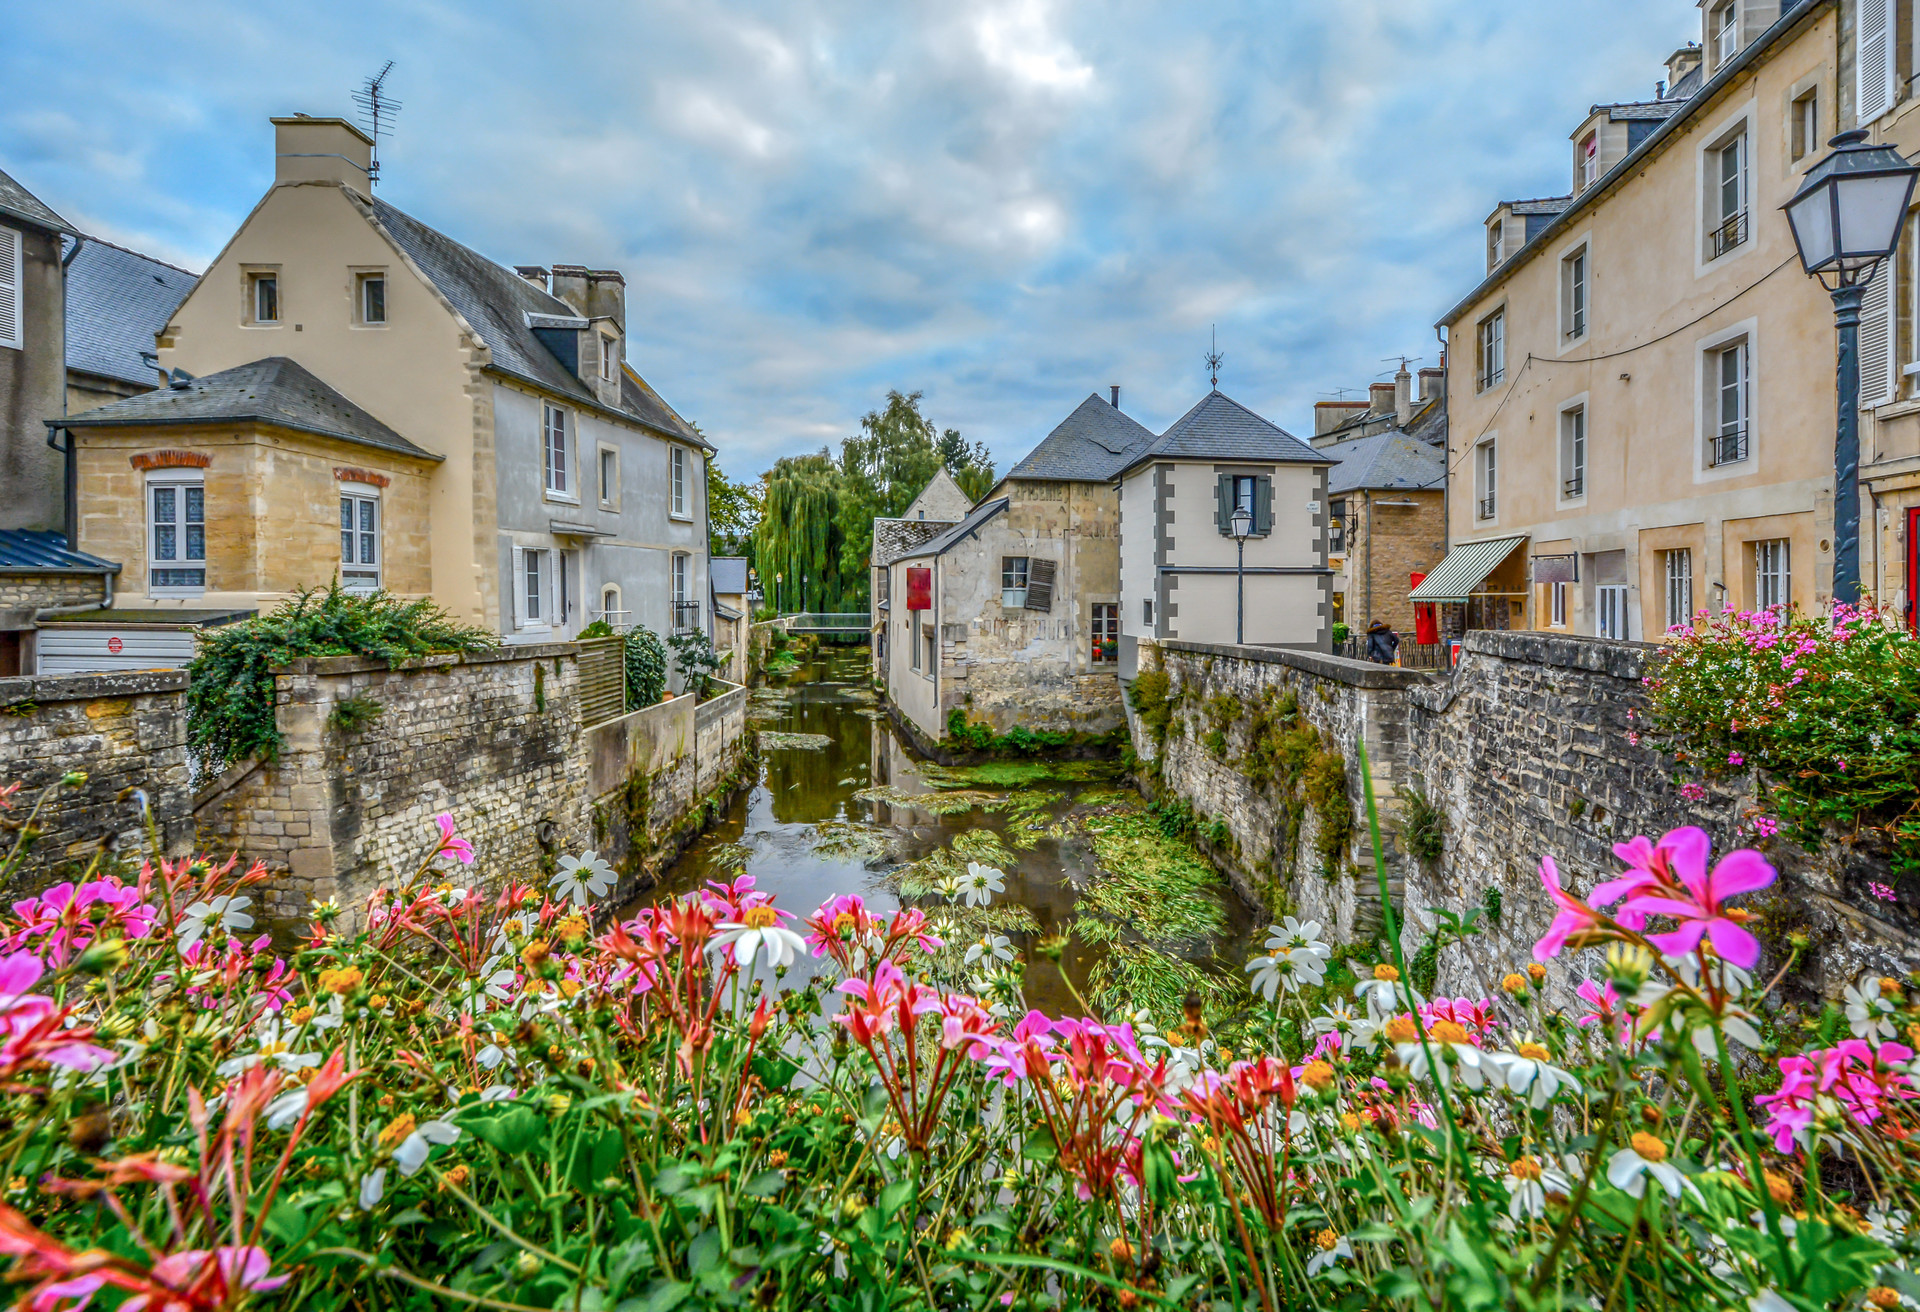 The picturesque French town of Bayeux France near the coast of Normandy with it's medieval houses overlooking the River Aure on an overcast day; Shutterstock ID 1050541298